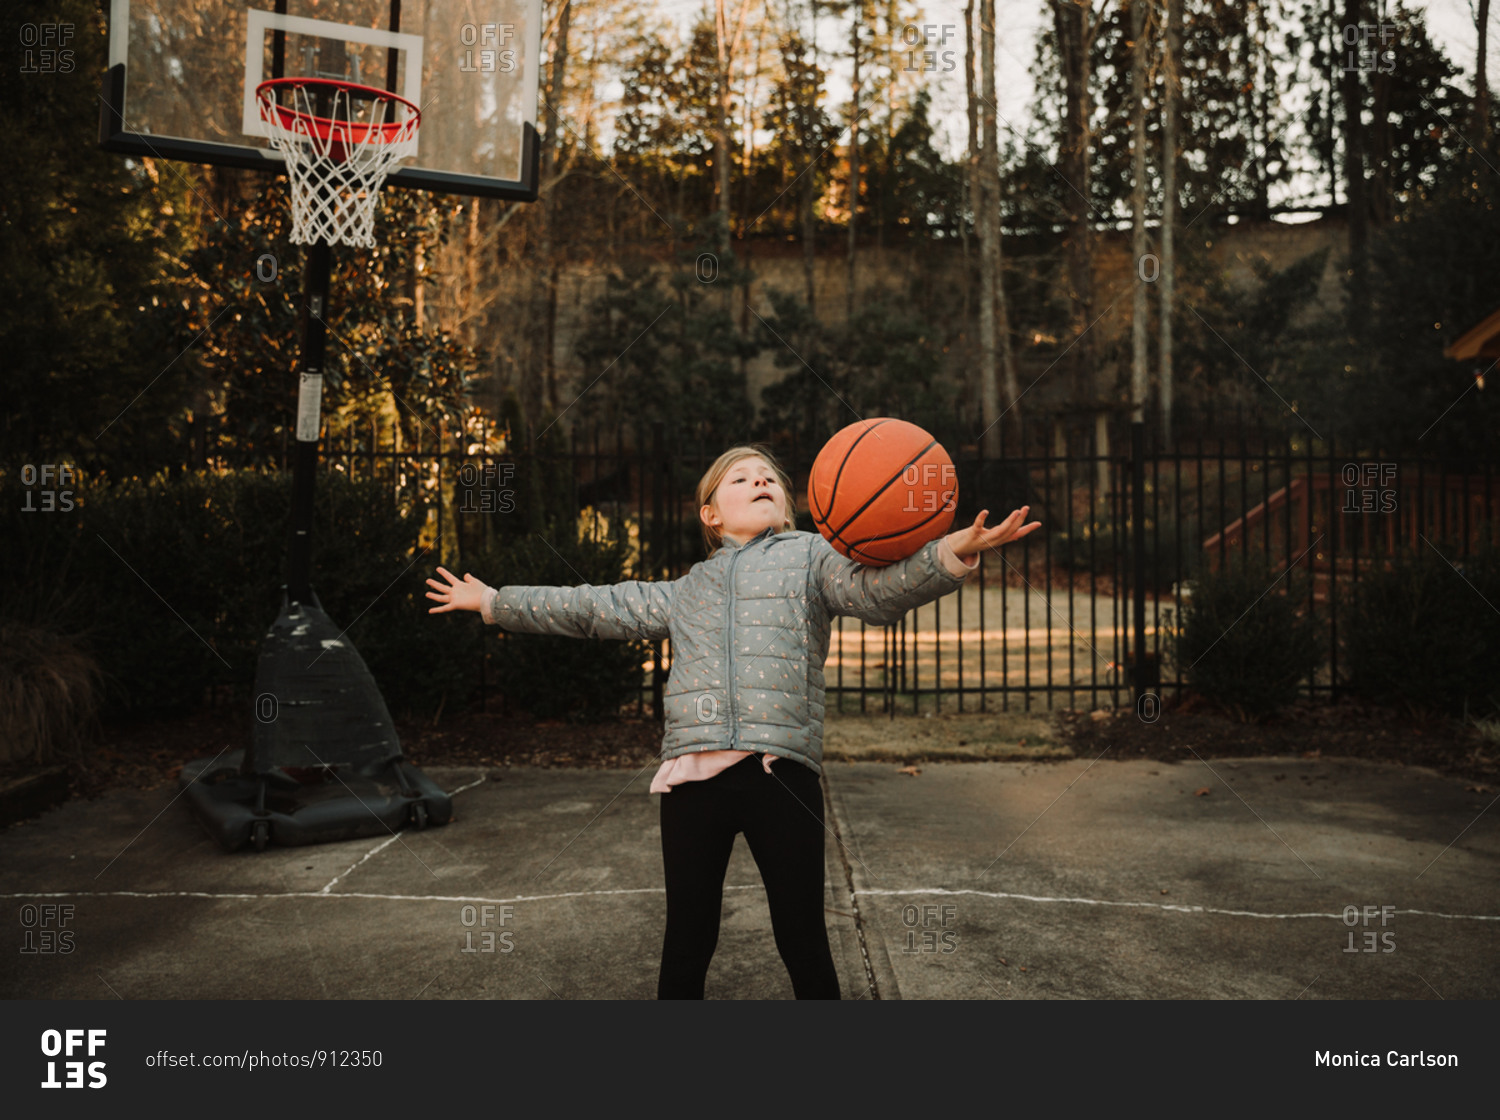 Girl playing basketball in her driveway stock photo -\
OFFSET